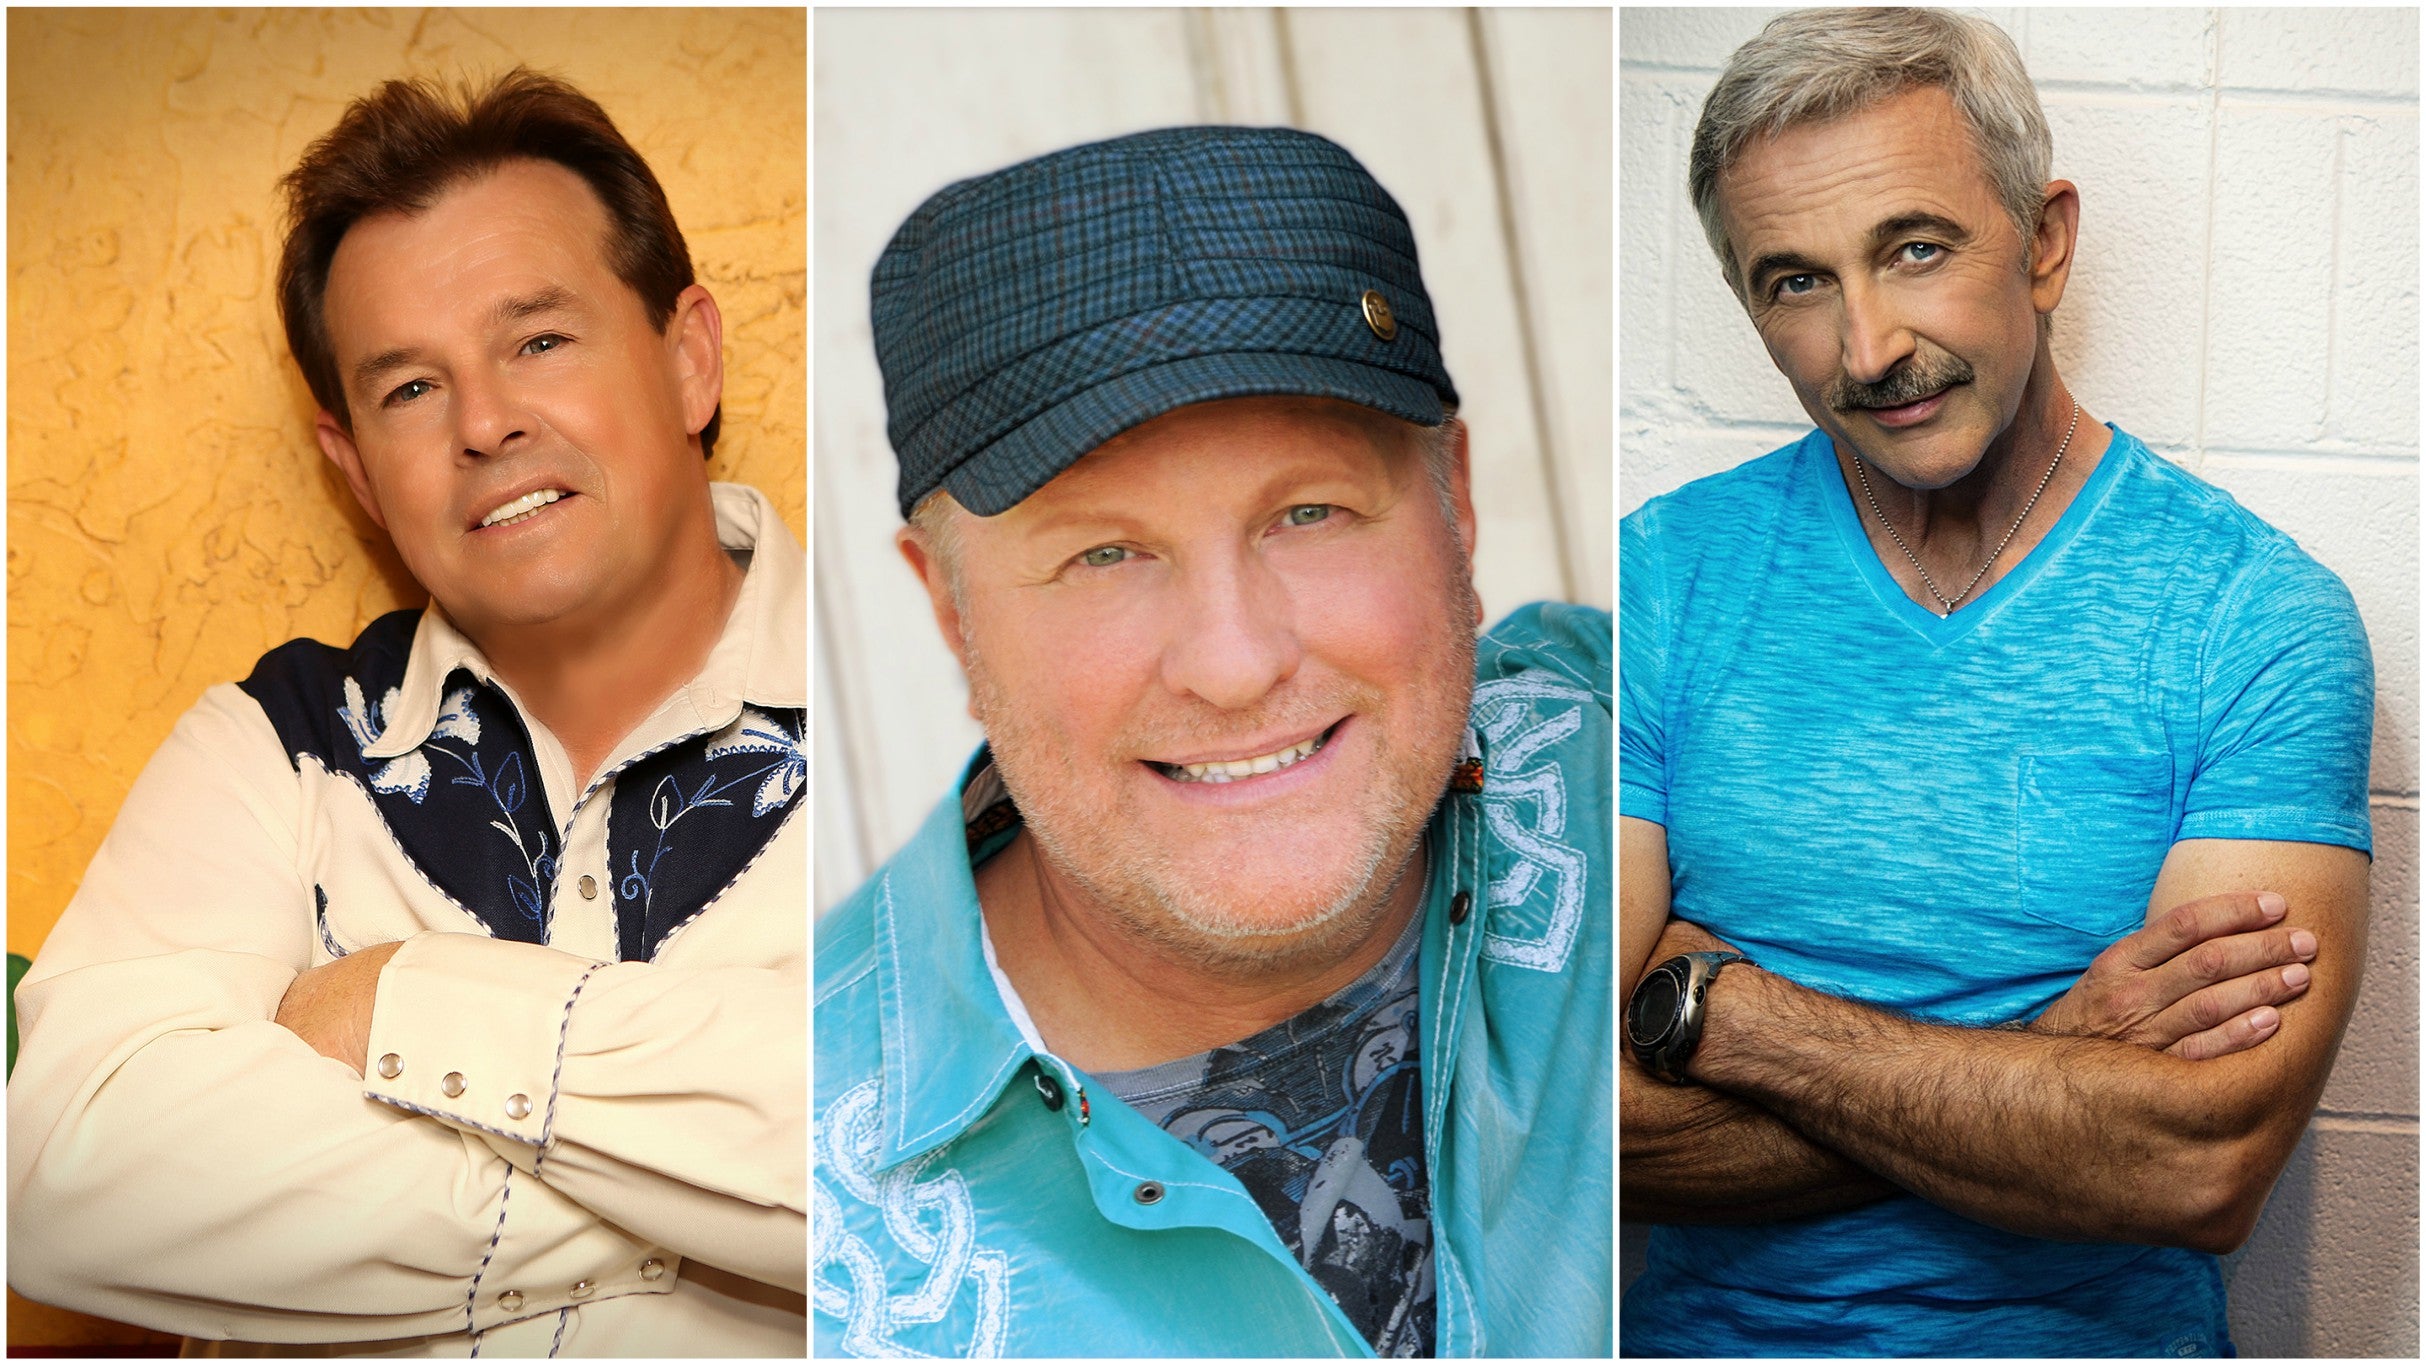 Roots and Boots - Aaron Tippin, Collin Raye, and Sammy Kershaw in Mashantucket promo photo for Official Platinum presale offer code